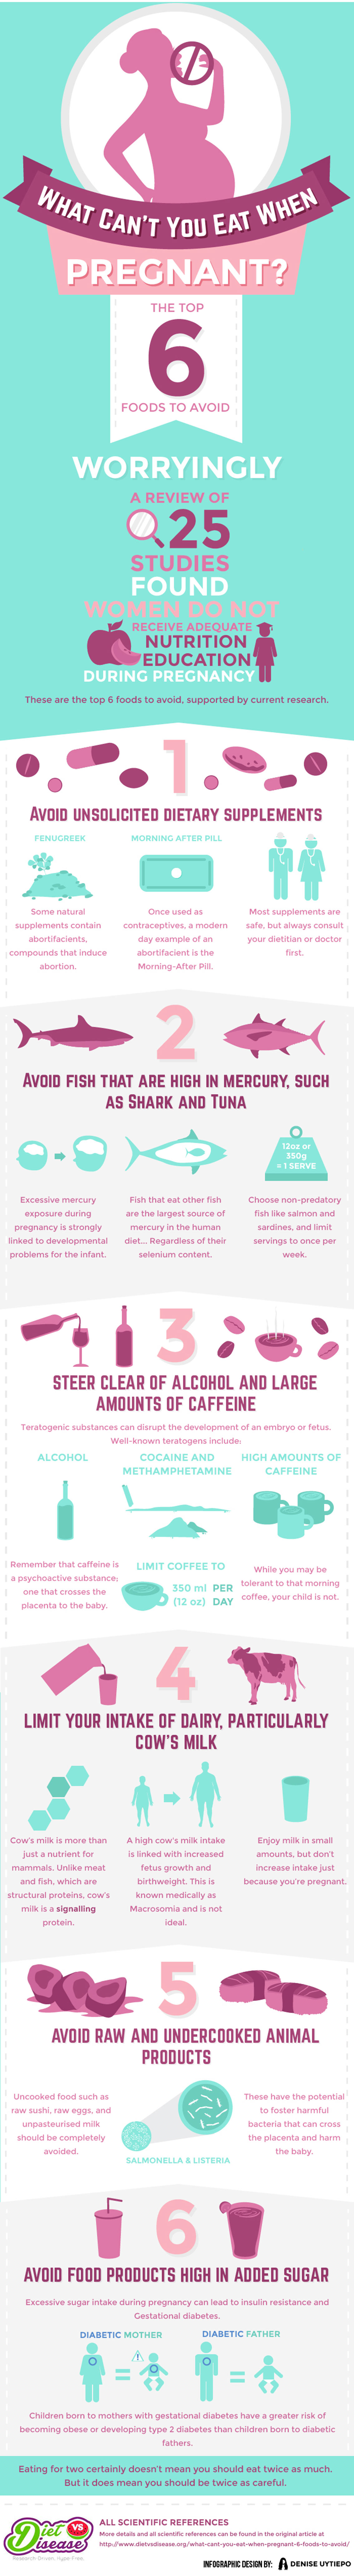 Top 6 Foods You Cant Eat When Pregnant - Pregnancy Infographic